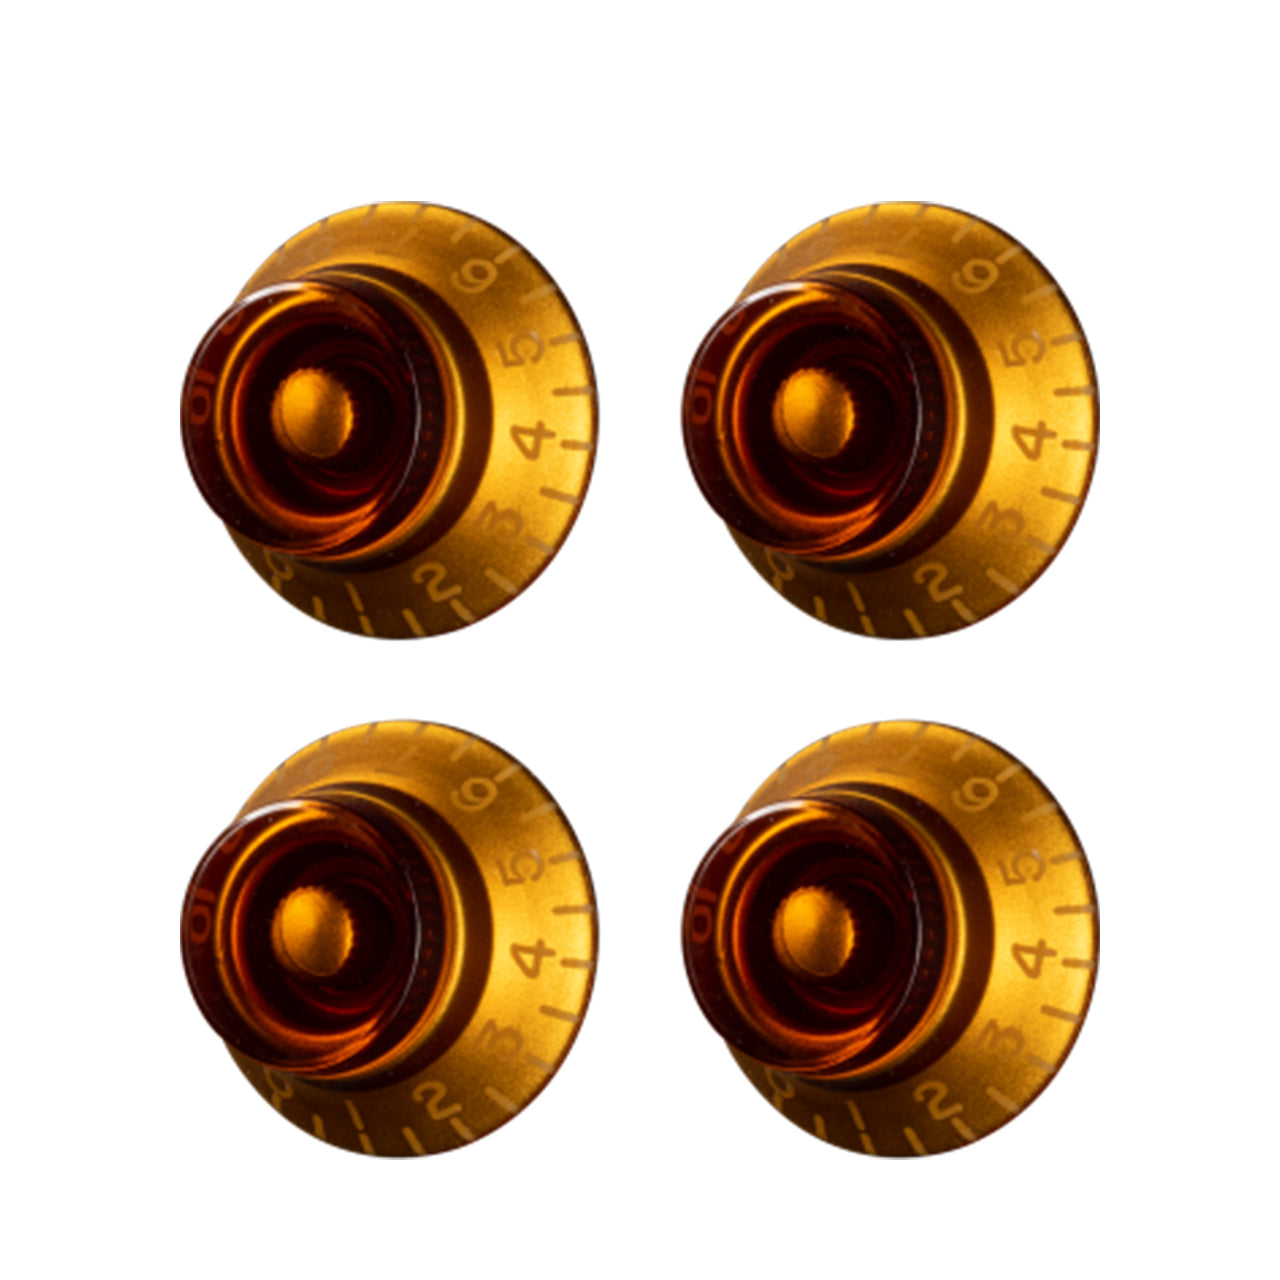 Gibson Top Hat Knobs Replacement 4-Pack, Vintage Amber